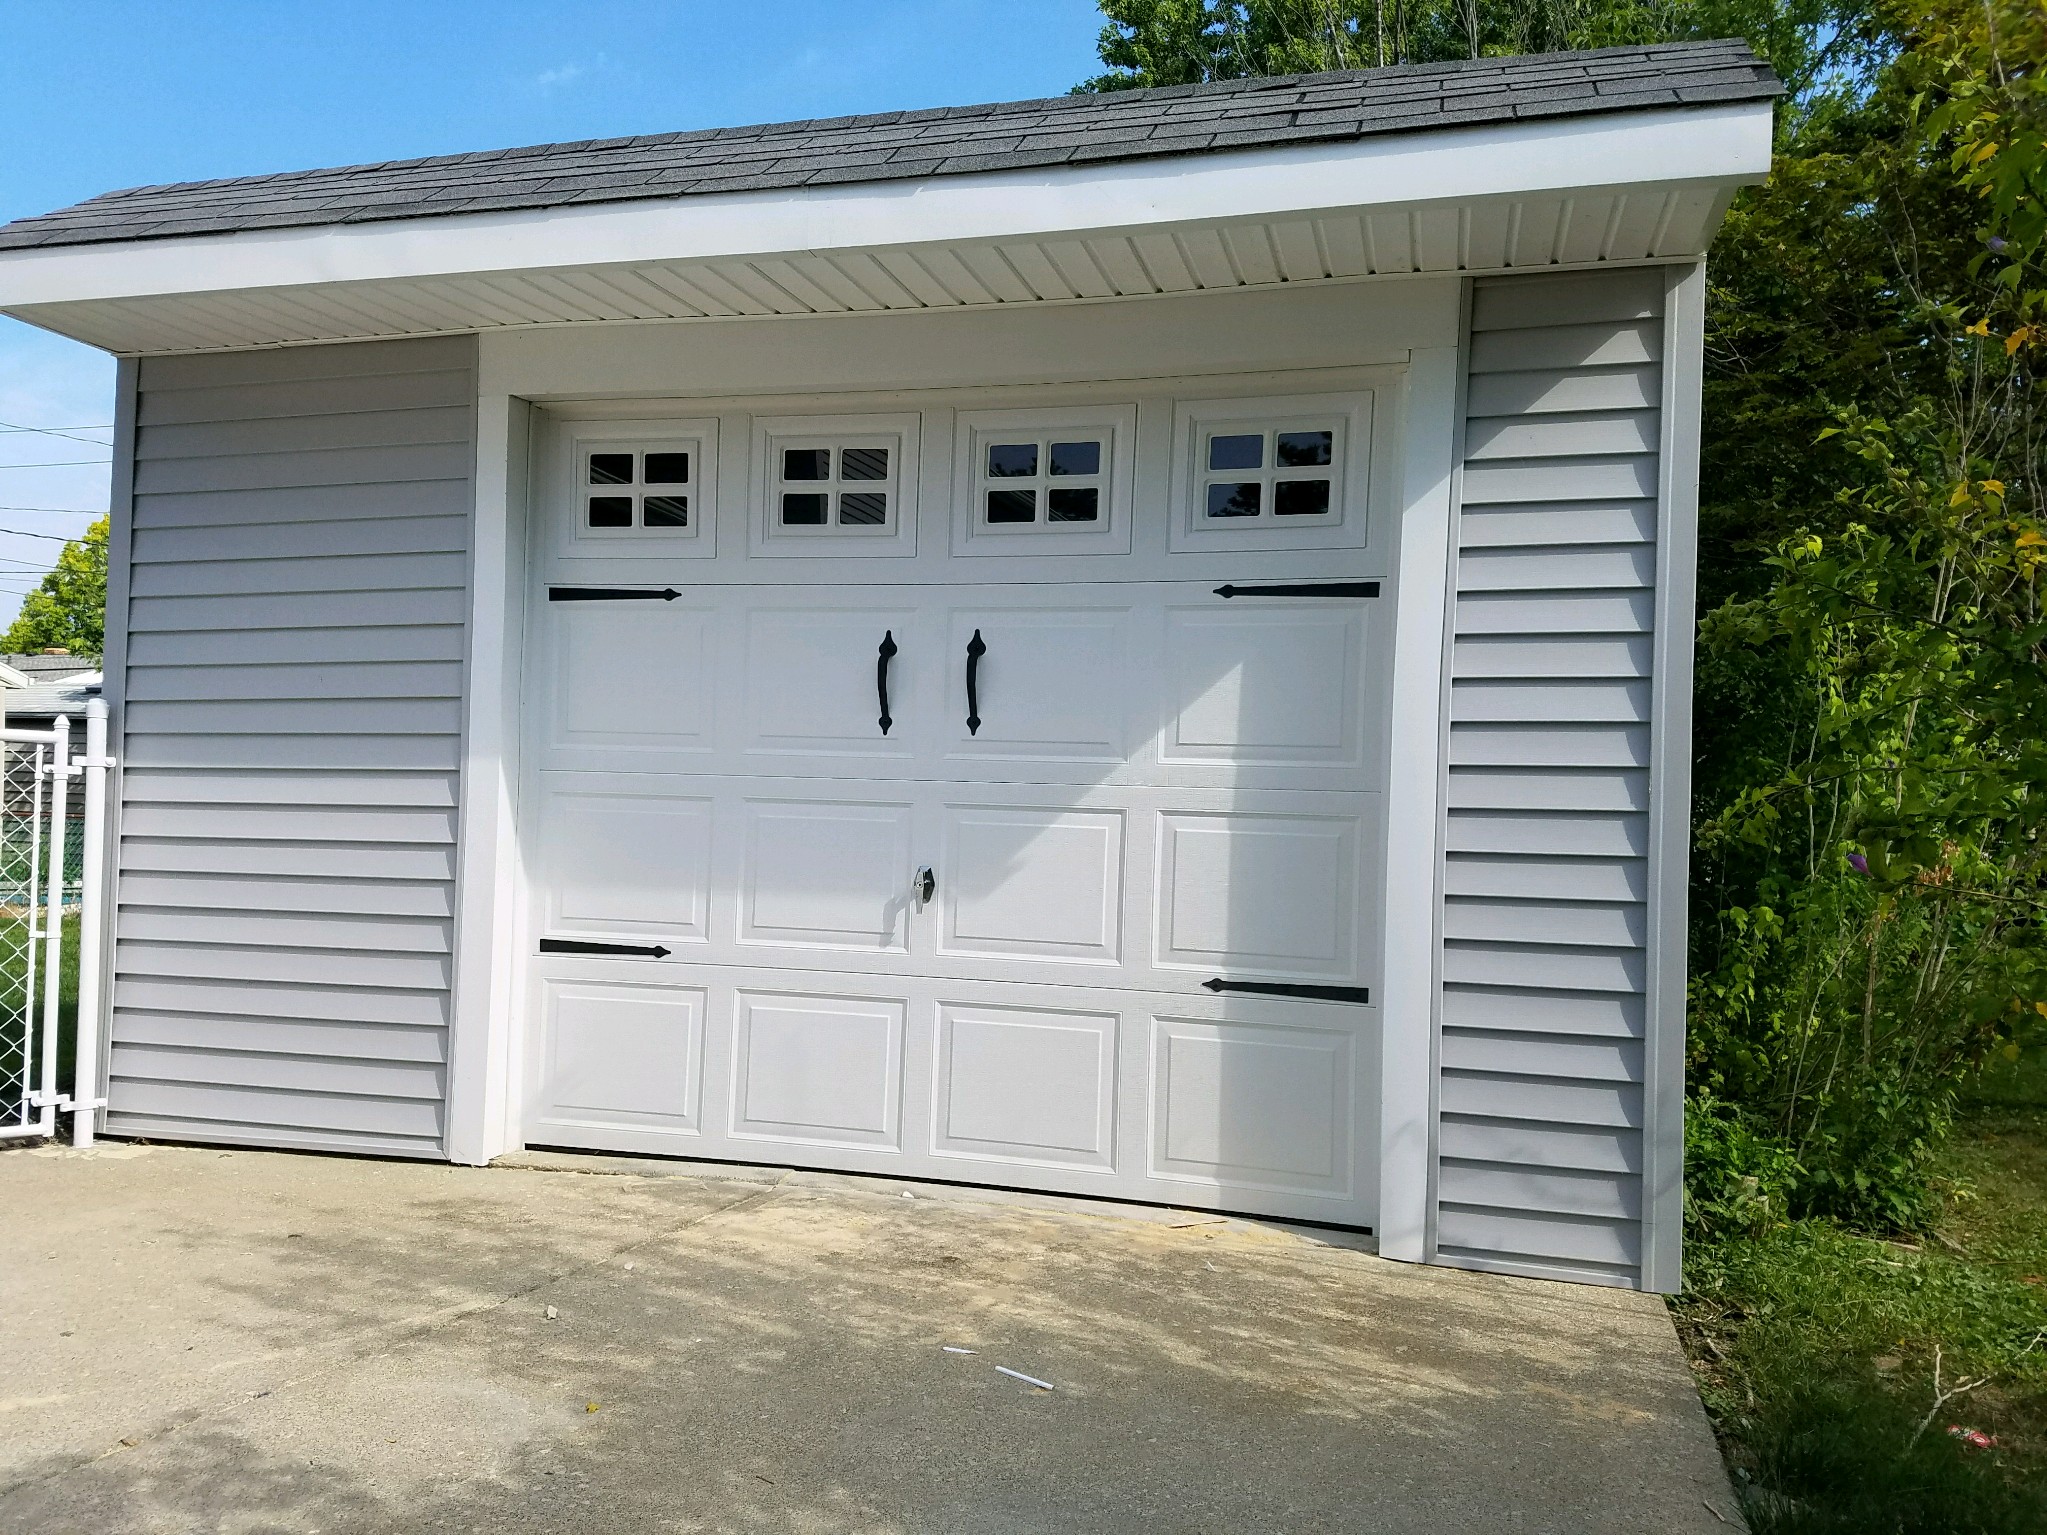 New Garage Door Prices Sams Club for Large Space